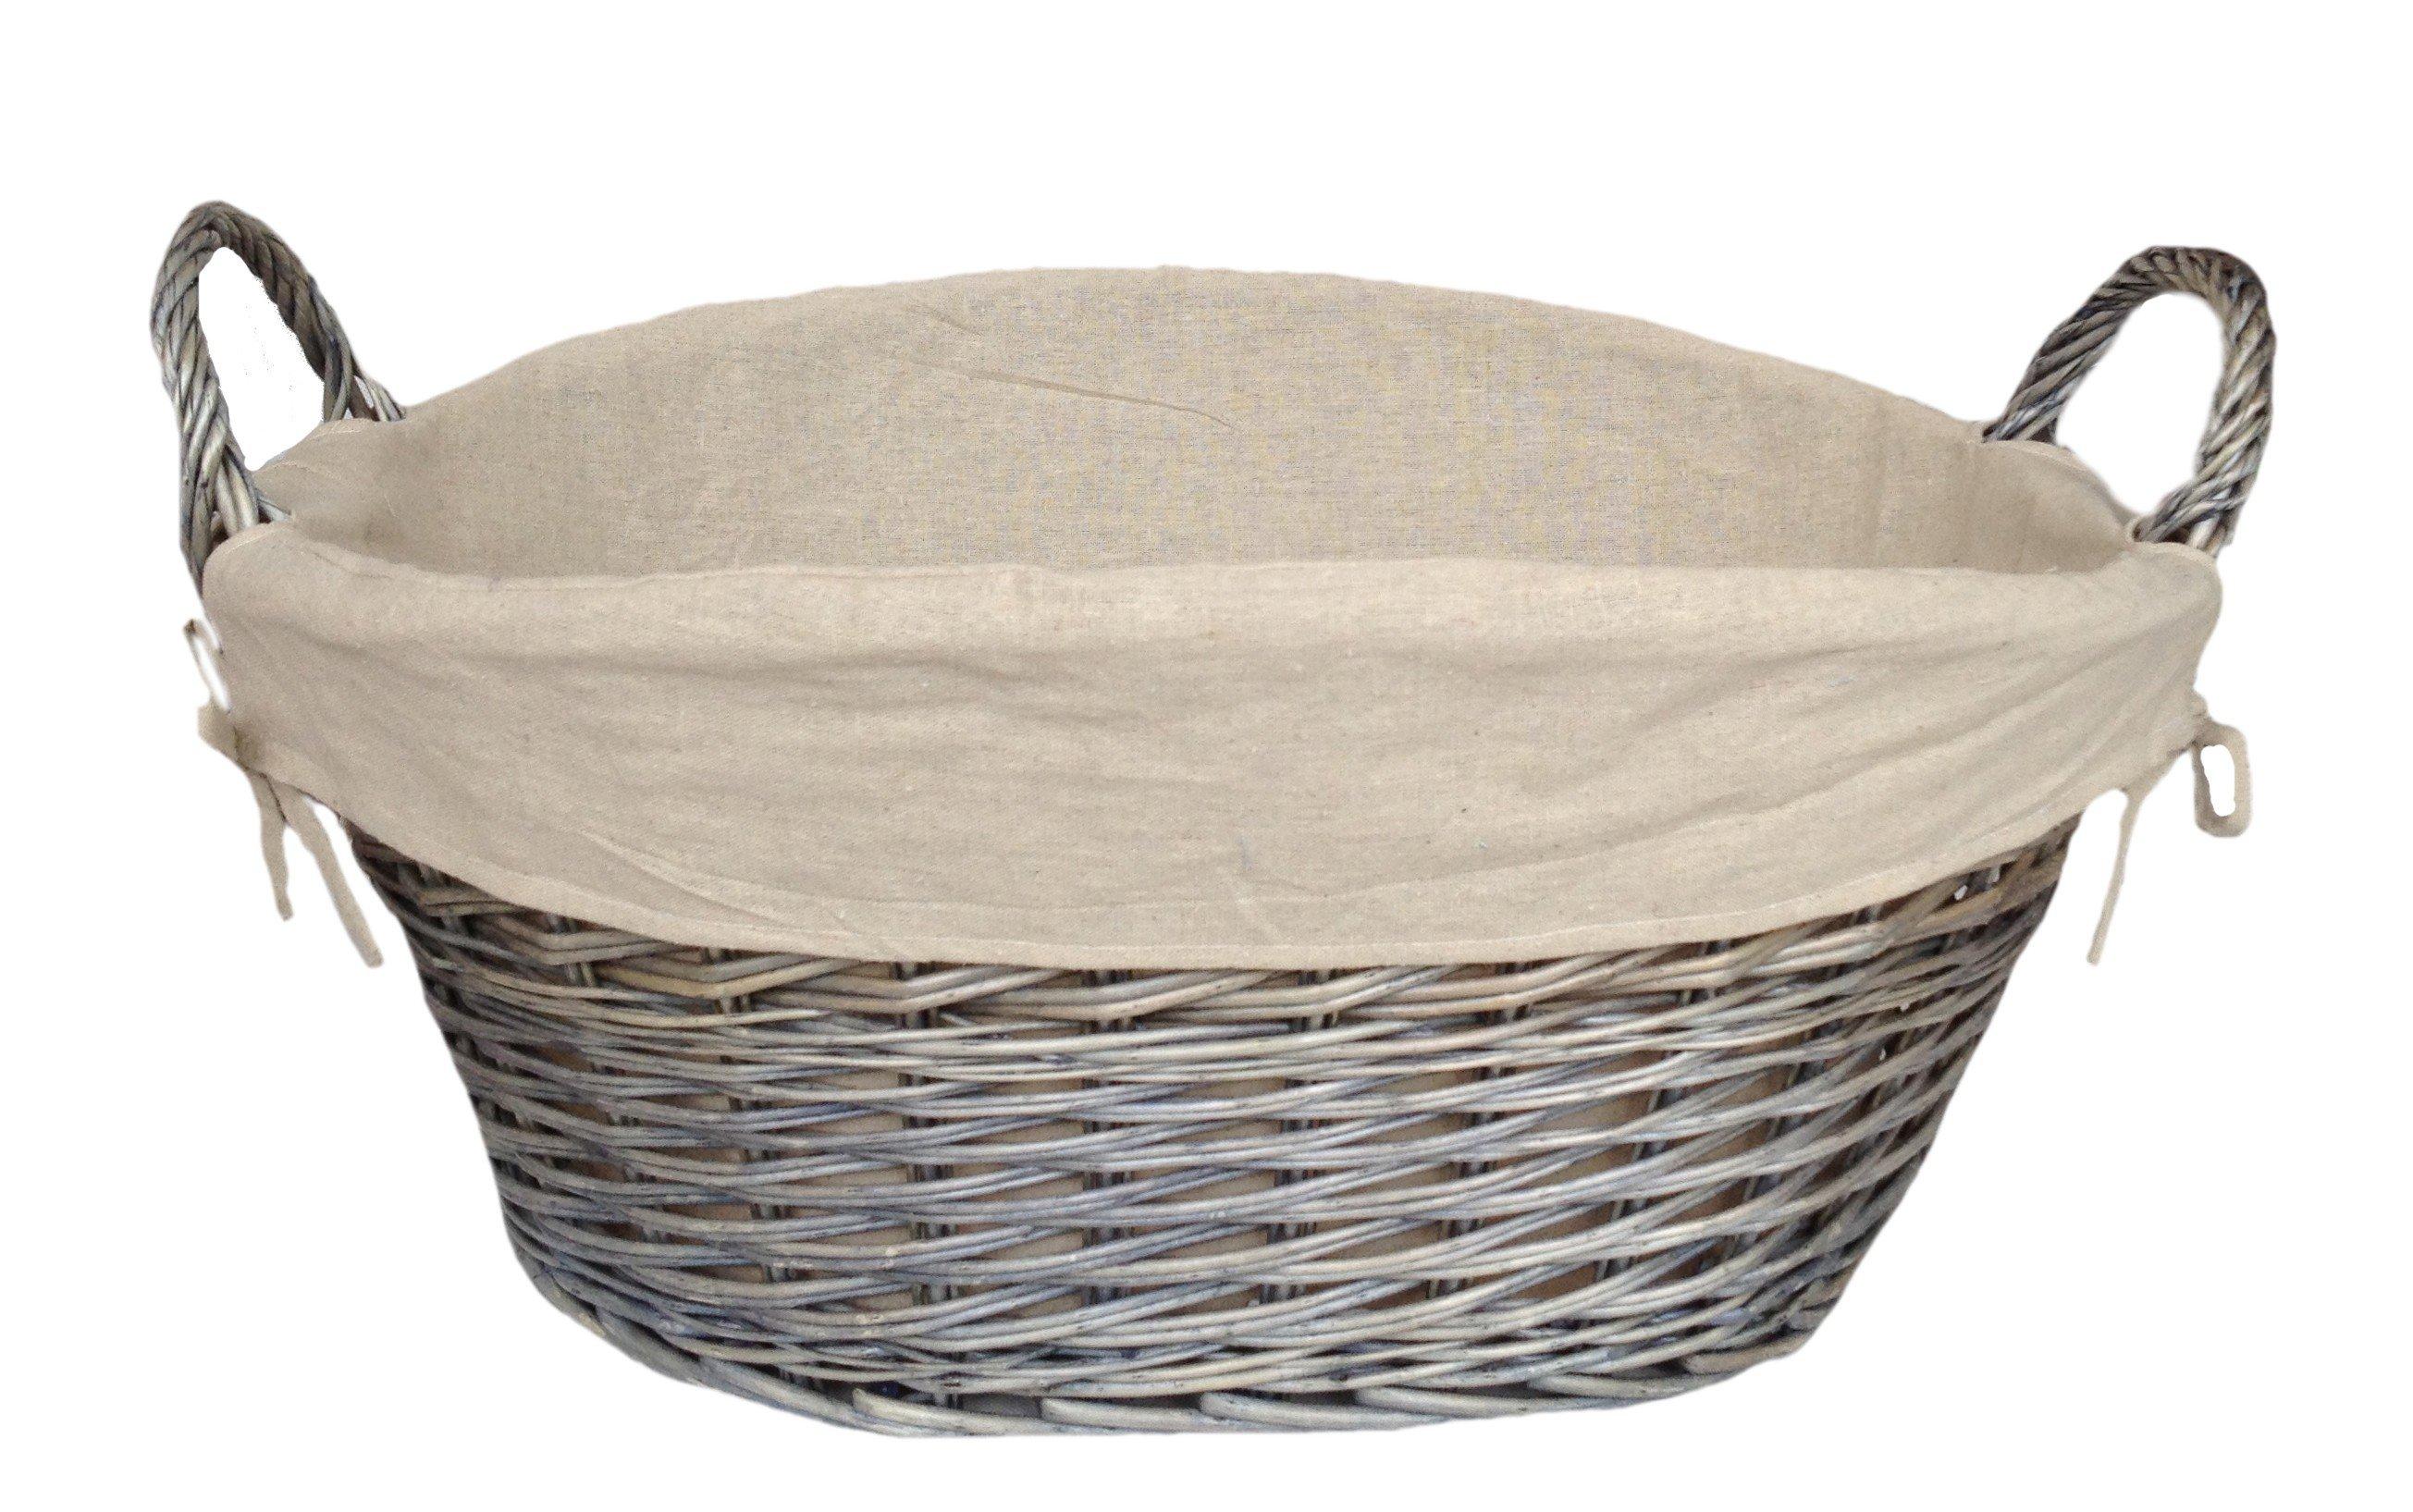 Wicker Antique Wash Lined Laundry Basket